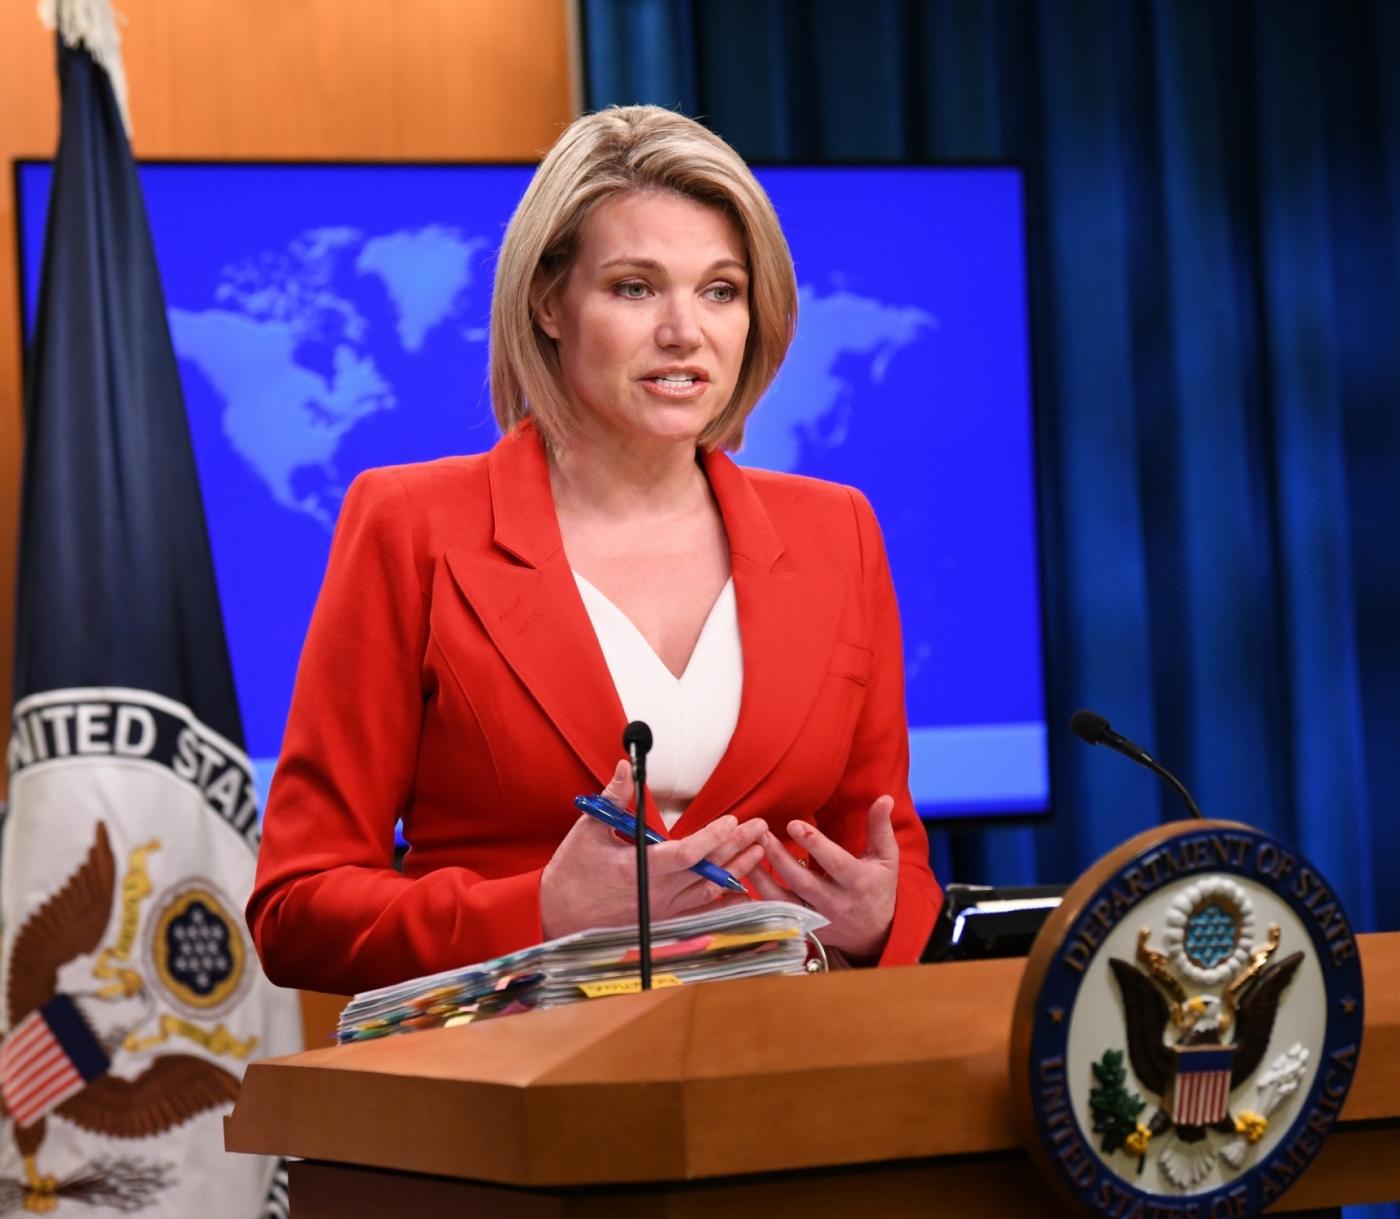 WASHINGTON, Oct. 2, 2018 (Xinhua) -- U.S. State Department spokesperson Heather Nauert addresses a press briefing in Washington D.C., the United States, on Oct. 2, 2018. Nauert said here on Tuesday that U.S. Secretary of State Mike Pompeo will travel to the Democratic People's Republic of Korea for further talks concerning the country's denuclearization. (Xinhua/Liu Jie/IANS) by .